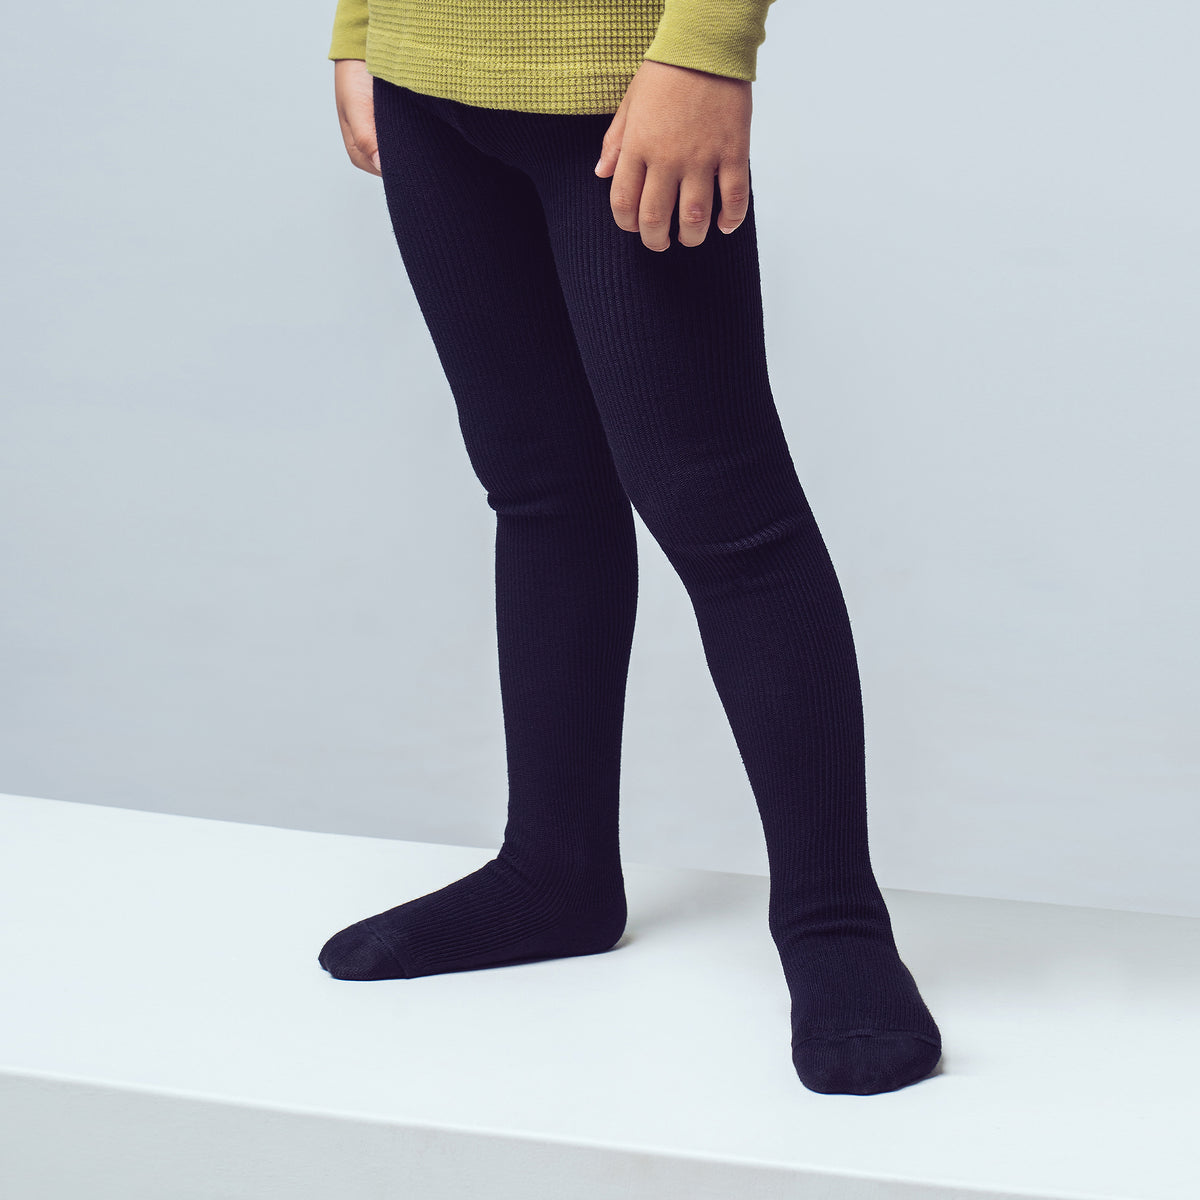 PEQNE Footed Children Tights in Carbon Black